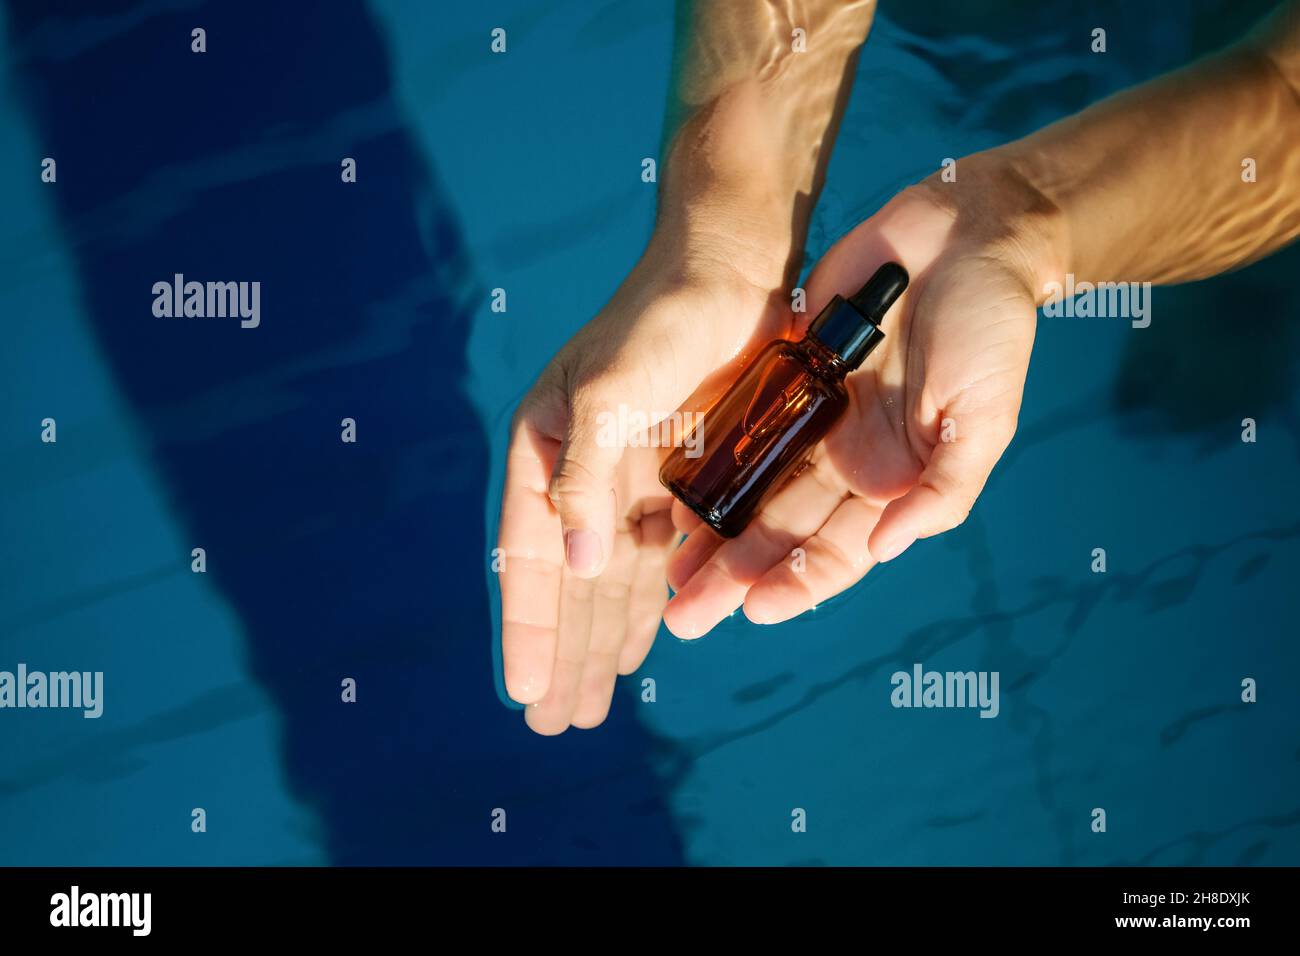 Woman hand holding empty organic serum skincare product glass amber bottle for use in a daytime with plain light blue swimming pool water background.  Stock Photo